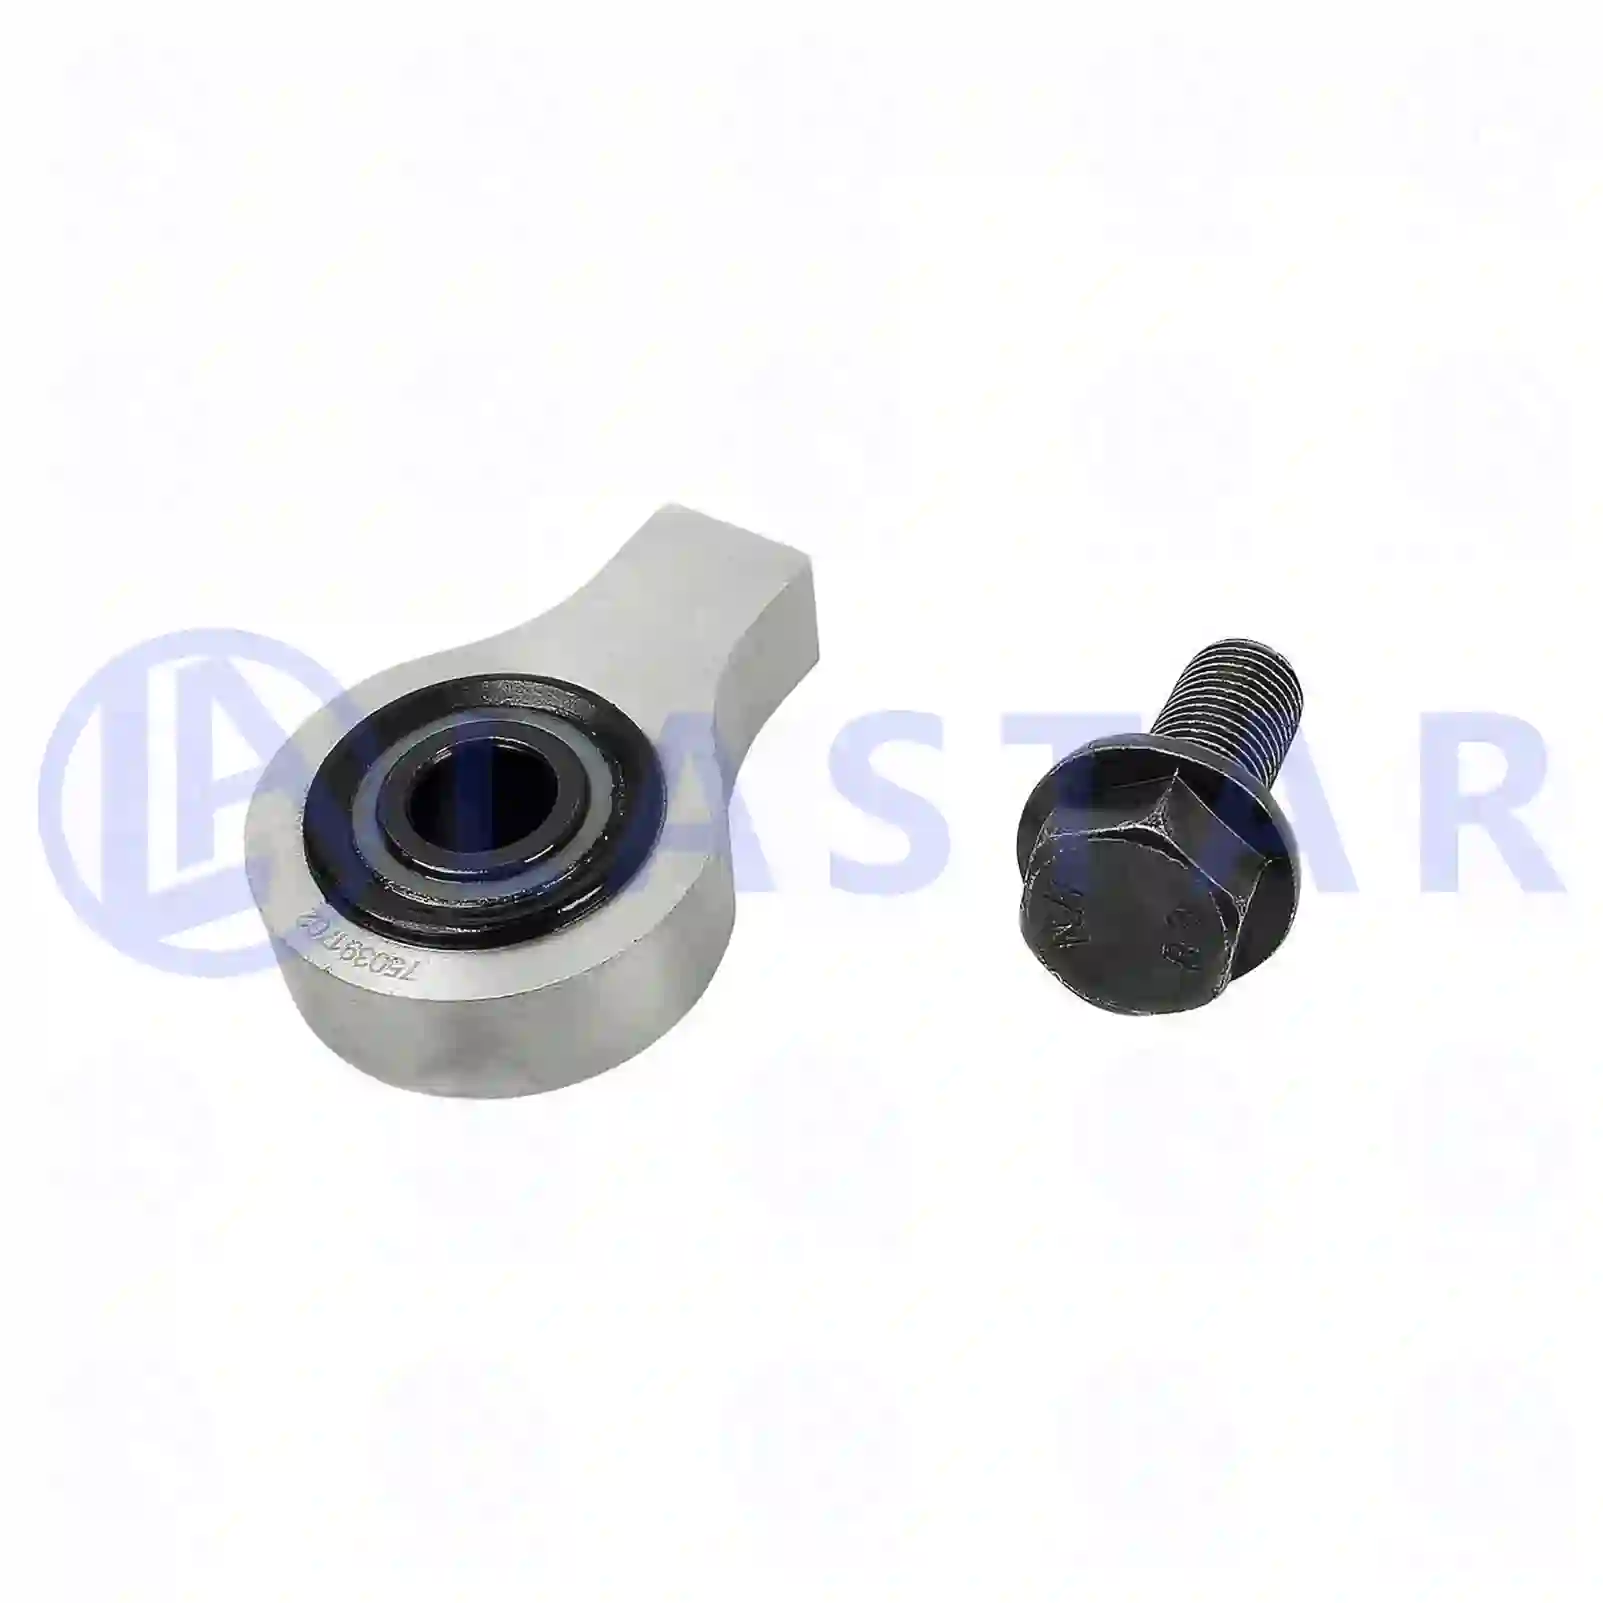 Bearing joint, complete with seal rings, 77736105, 2171717 ||  77736105 Lastar Spare Part | Truck Spare Parts, Auotomotive Spare Parts Bearing joint, complete with seal rings, 77736105, 2171717 ||  77736105 Lastar Spare Part | Truck Spare Parts, Auotomotive Spare Parts